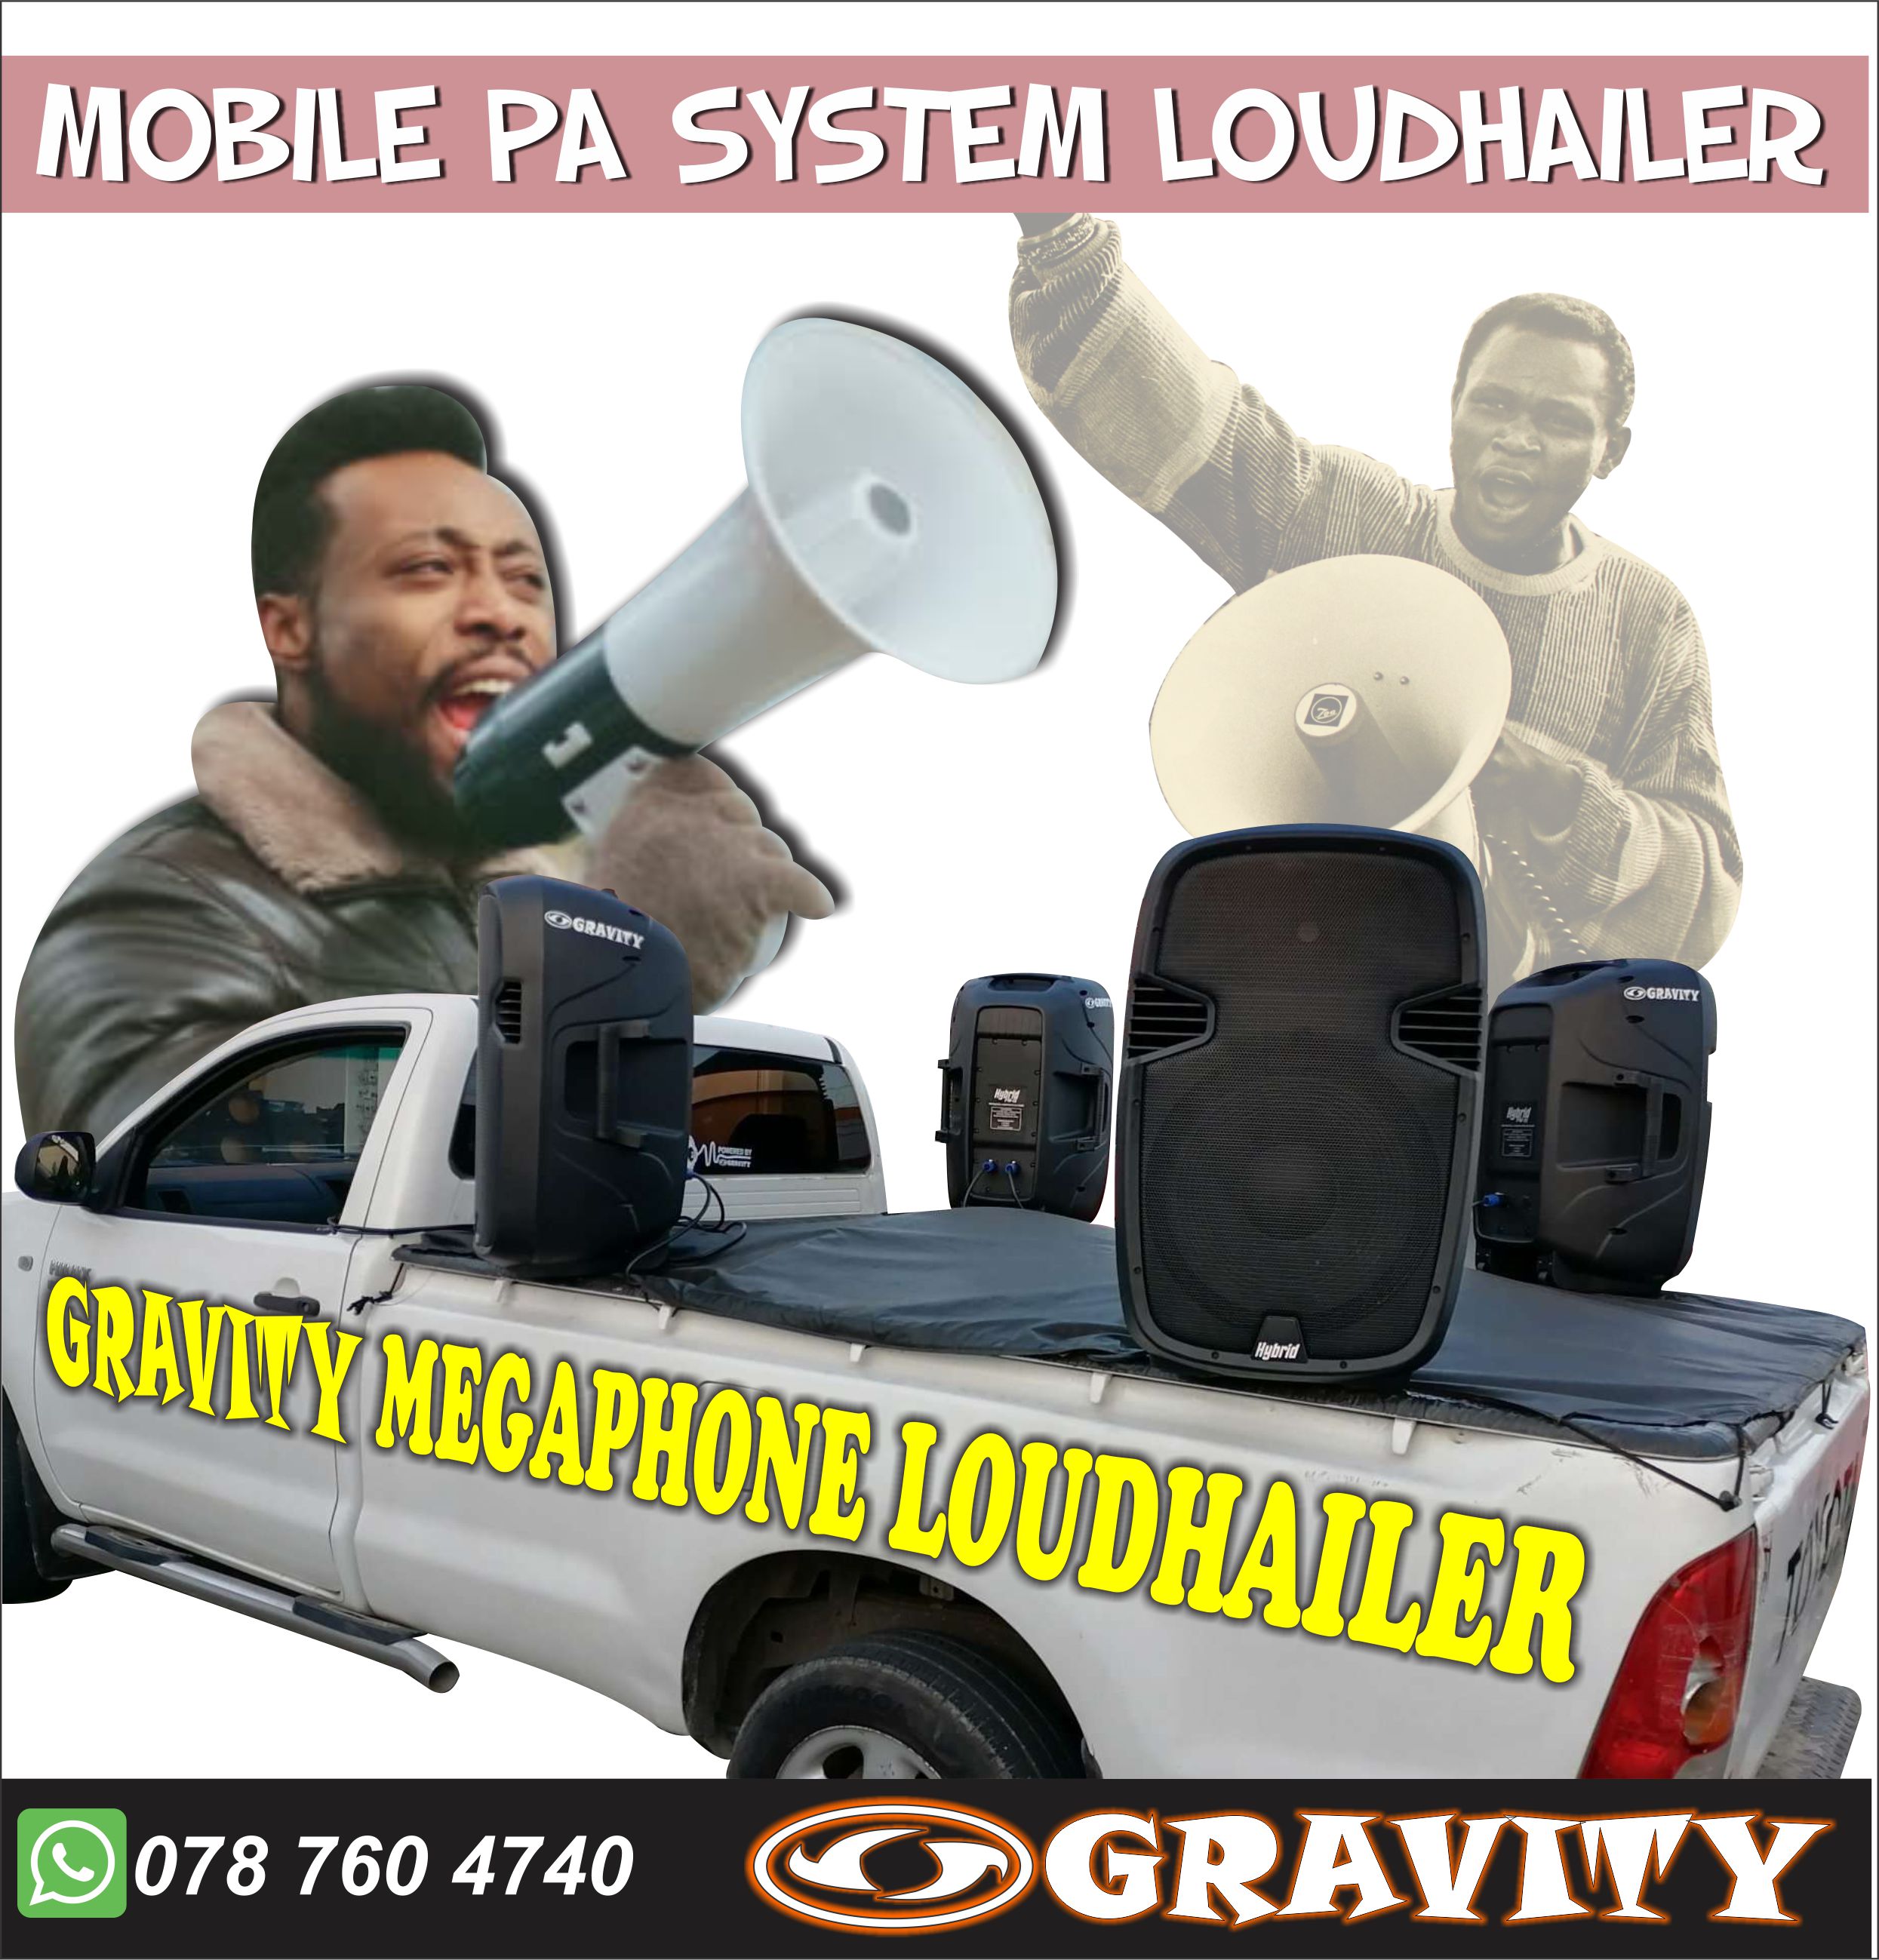 Megaphone Loudhailer Mic Speaker PUBLIC ADDRESS BROADCASTING SYSTEMS DURBAN elections megaphone loudhailer | deal megphones mic system for all your outdoor events like rallys, marches, political rallys and announcements Political Elections outdoor announcements available at gravity dj store 0315072736  0315072463  . Megaphone Loudspeaker ANC elections outdoor events announcements 0315072463  DA political elections megaphone mic speaker needed at gravity dj store 0315072463  -with handheld mic OR without  -battery operated  -12v car power compatible  -Different sizes available:    * 5w / 15w  25w / 40w  loudspeaker horn loud hailer megaphone...`CALL STORE FOR AVAILABILITY  -sling strap carry about loudspeaker   -portable loudspeaker megaphone  -outdoor handheld mobile loudspeaker  Megaphones, loudhailers, and pa amplifiers used in public hearings, schools and elections a system of microphones, amplifiers, and loudspeakers used to amplify speech or music in a large building or at an outdoor gathering.This article is about audio systems. For public IP addresses, see IP address.Durable sound for events, evacuation, meetings and political rallies. Professional advice is free and is a phone call away Megaphone  From Wikipedia, the free encyclopedia This article is about the amplification device. For the chemical compound, see Megaphone (molecule). For other uses, see Megaphone (disambiguation). 